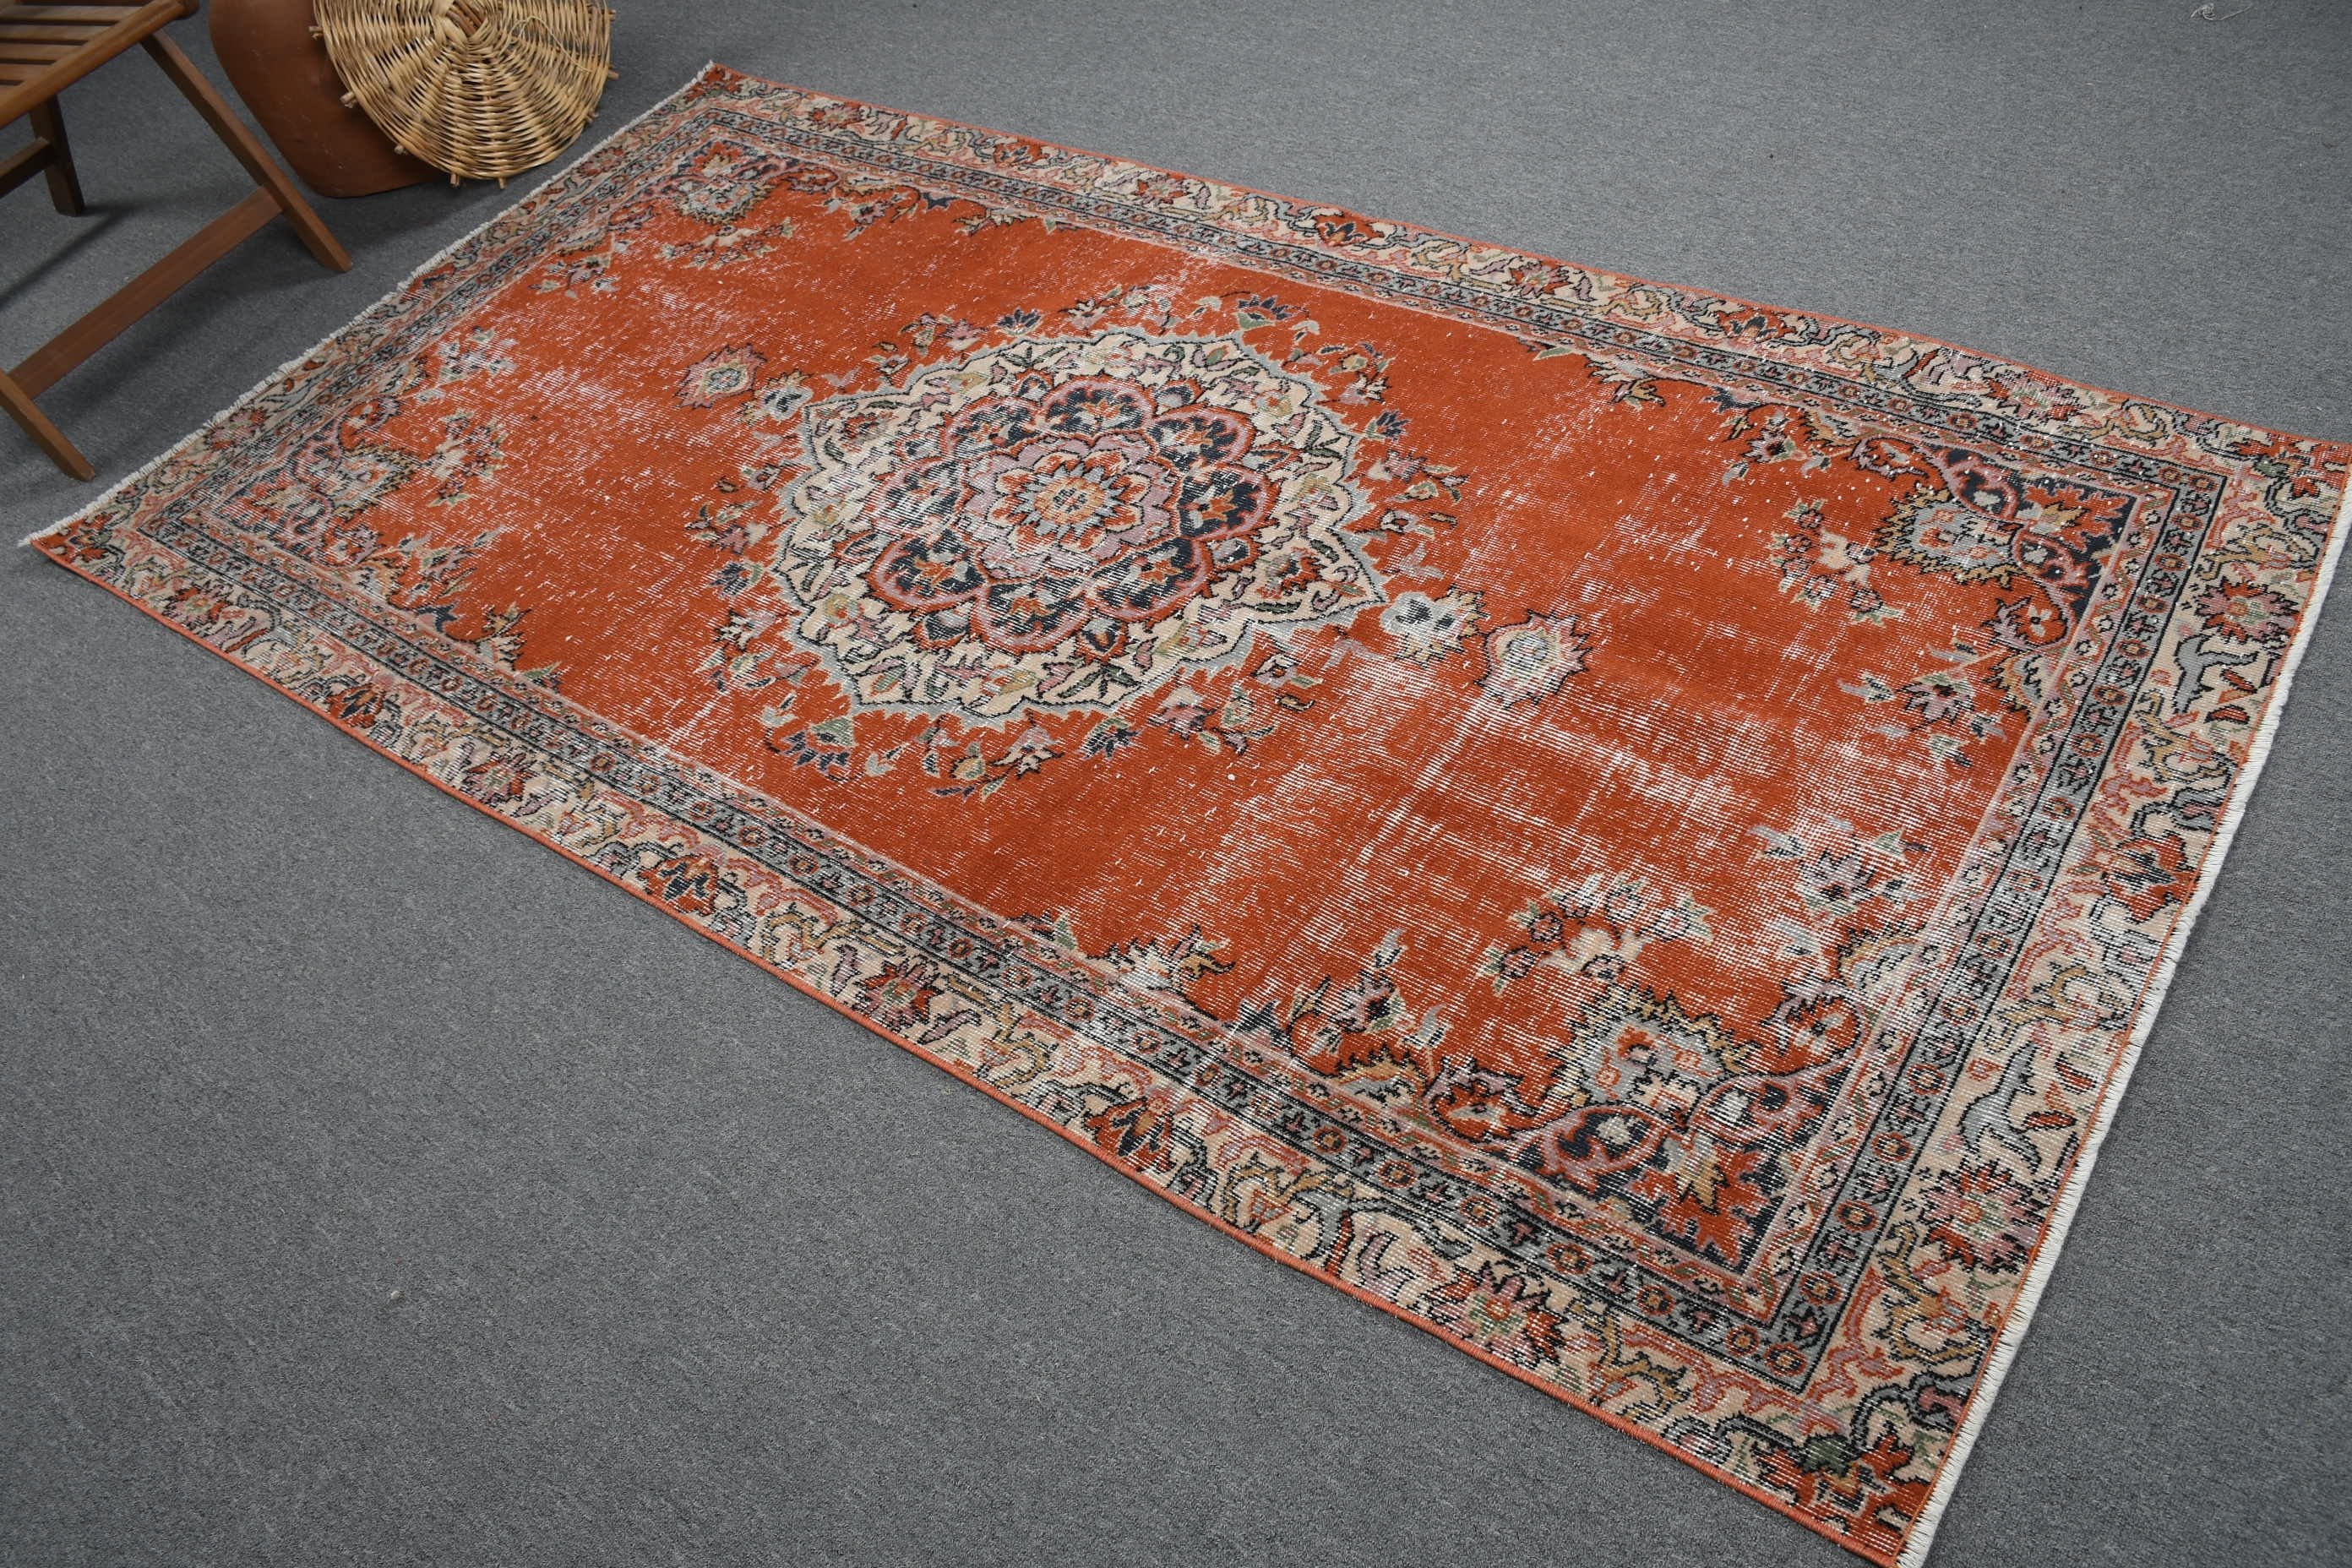 Turkish Rug, Office Rug, Kitchen Rug, Red Home Decor Rug, Living Room Rug, Home Decor Rug, Bedroom Rugs, Vintage Rugs, 4.1x7.9 ft Area Rugs